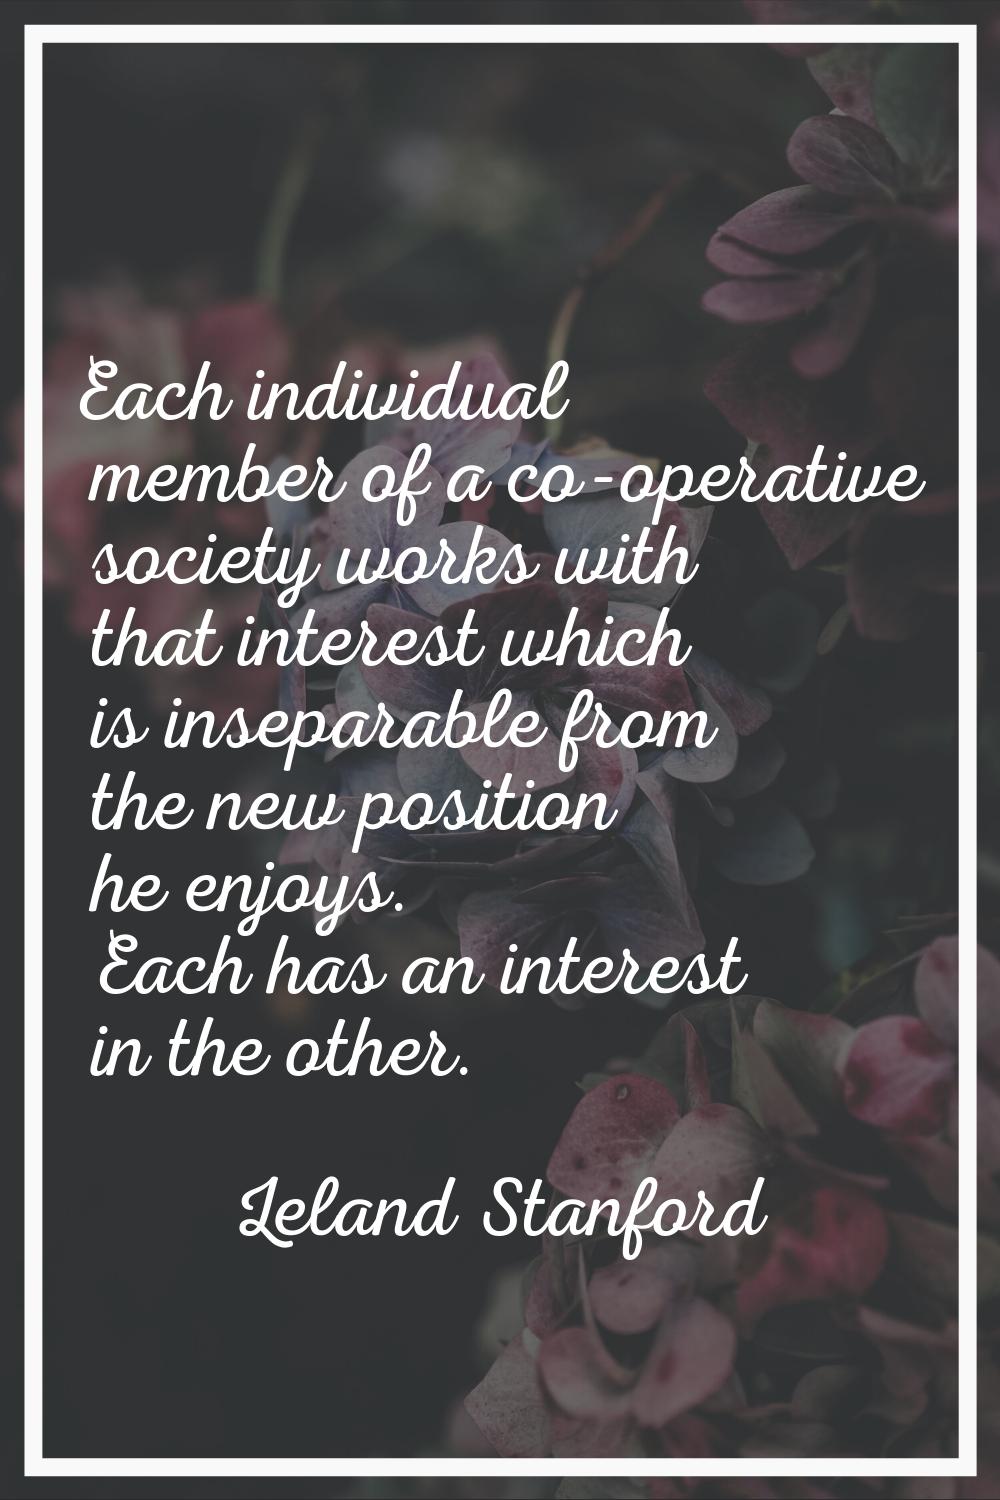 Each individual member of a co-operative society works with that interest which is inseparable from